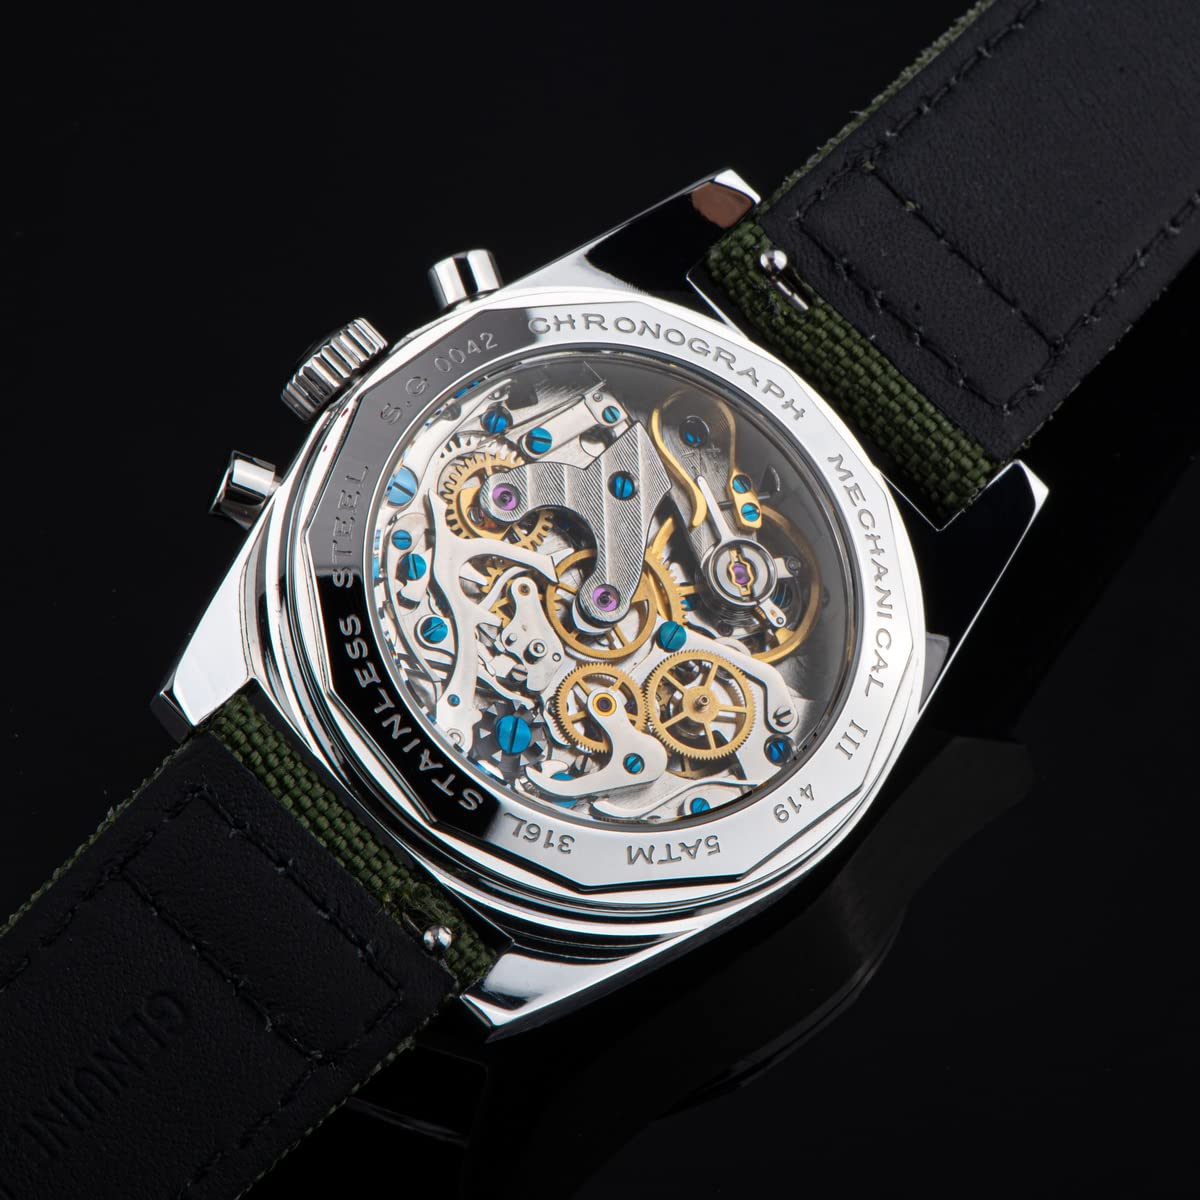 Sugess 37mm Hand Winding Men Pilot Watches Seagull ST1902 Chronograph Swanneck Mechanical Wristwatches